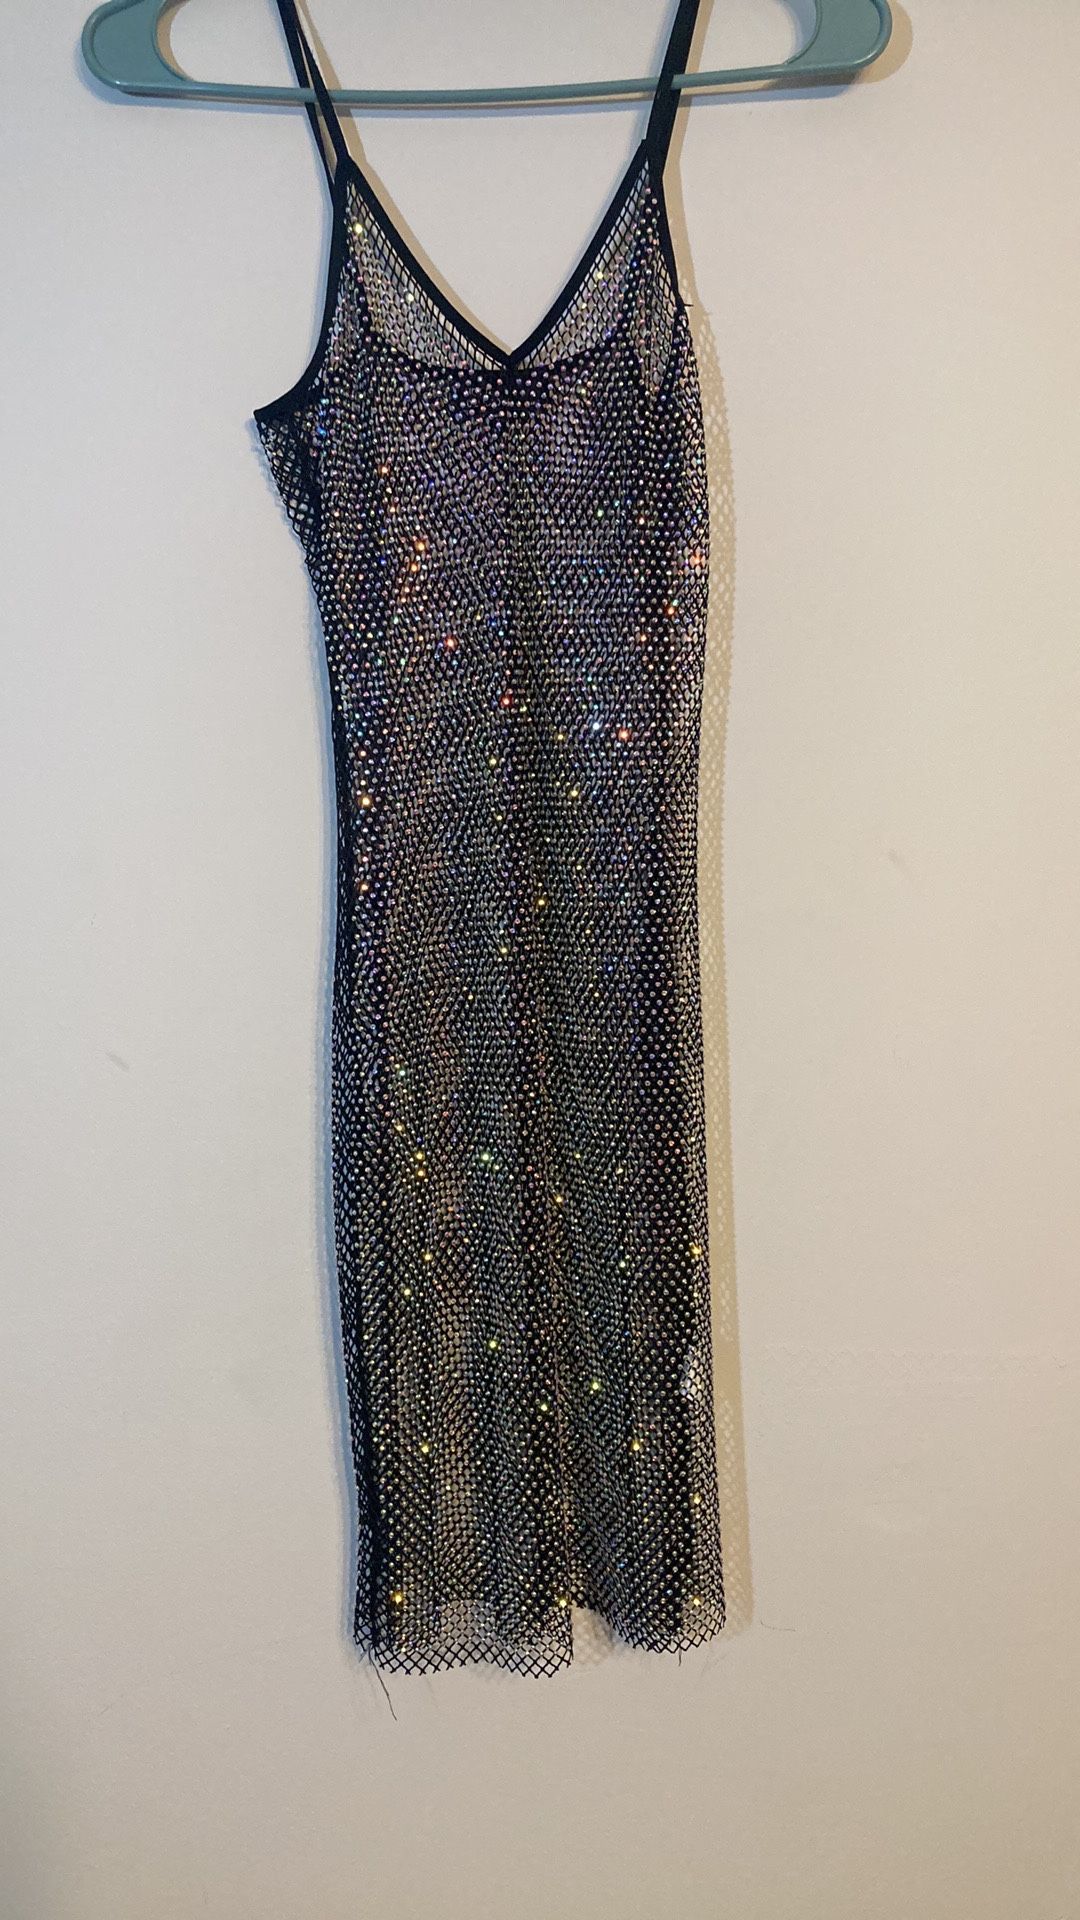 Sequin See through Dress Small